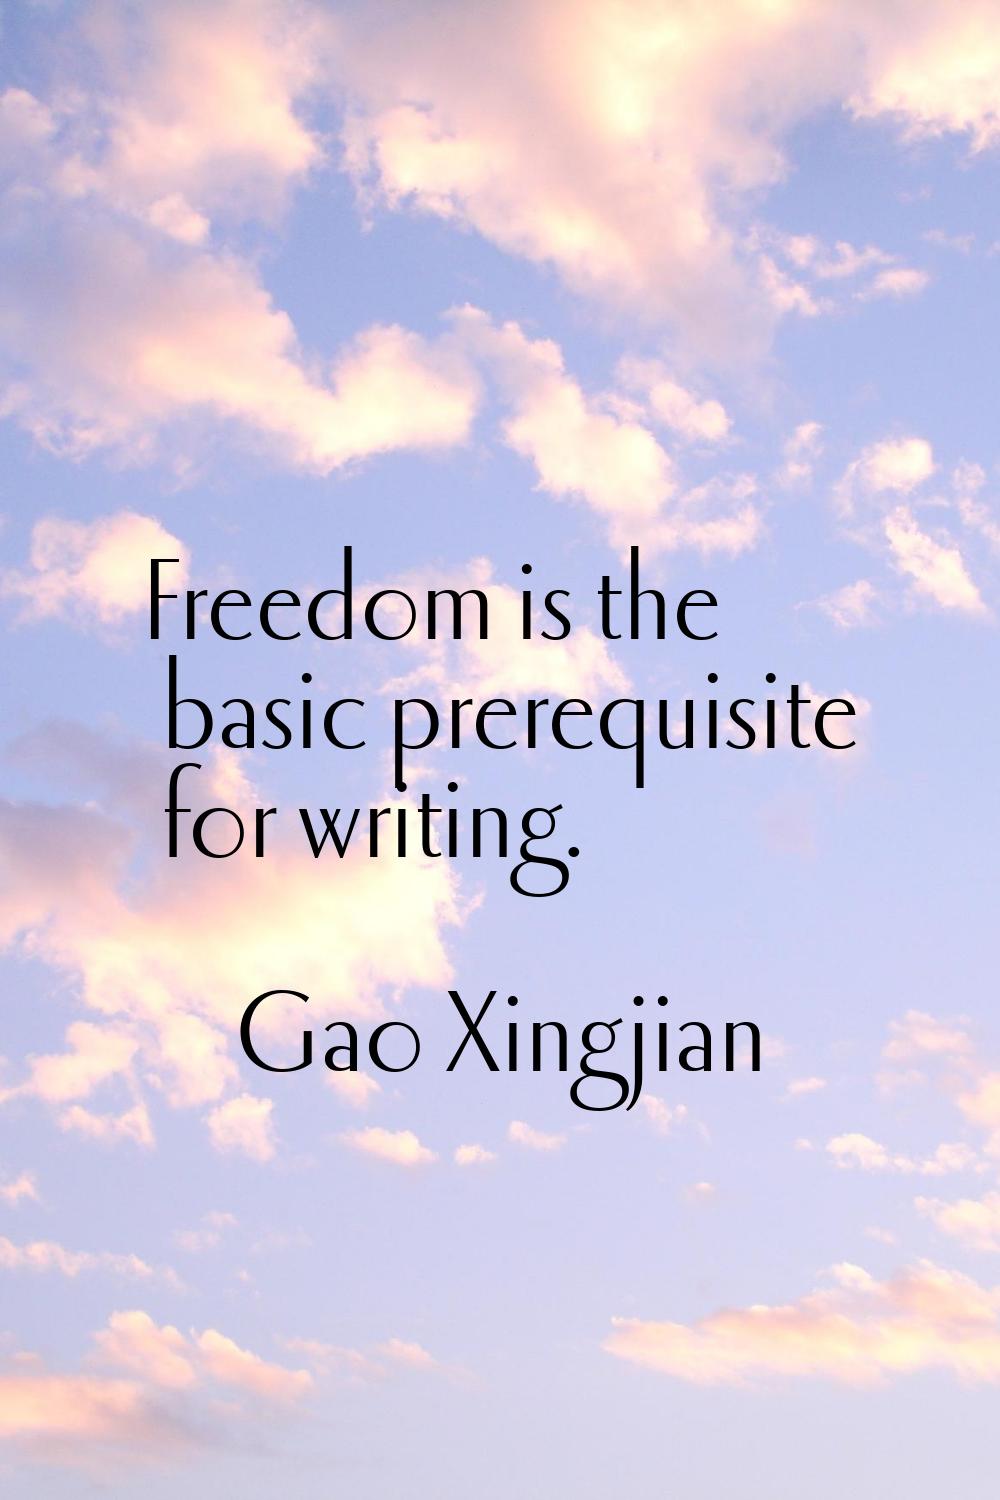 Freedom is the basic prerequisite for writing.